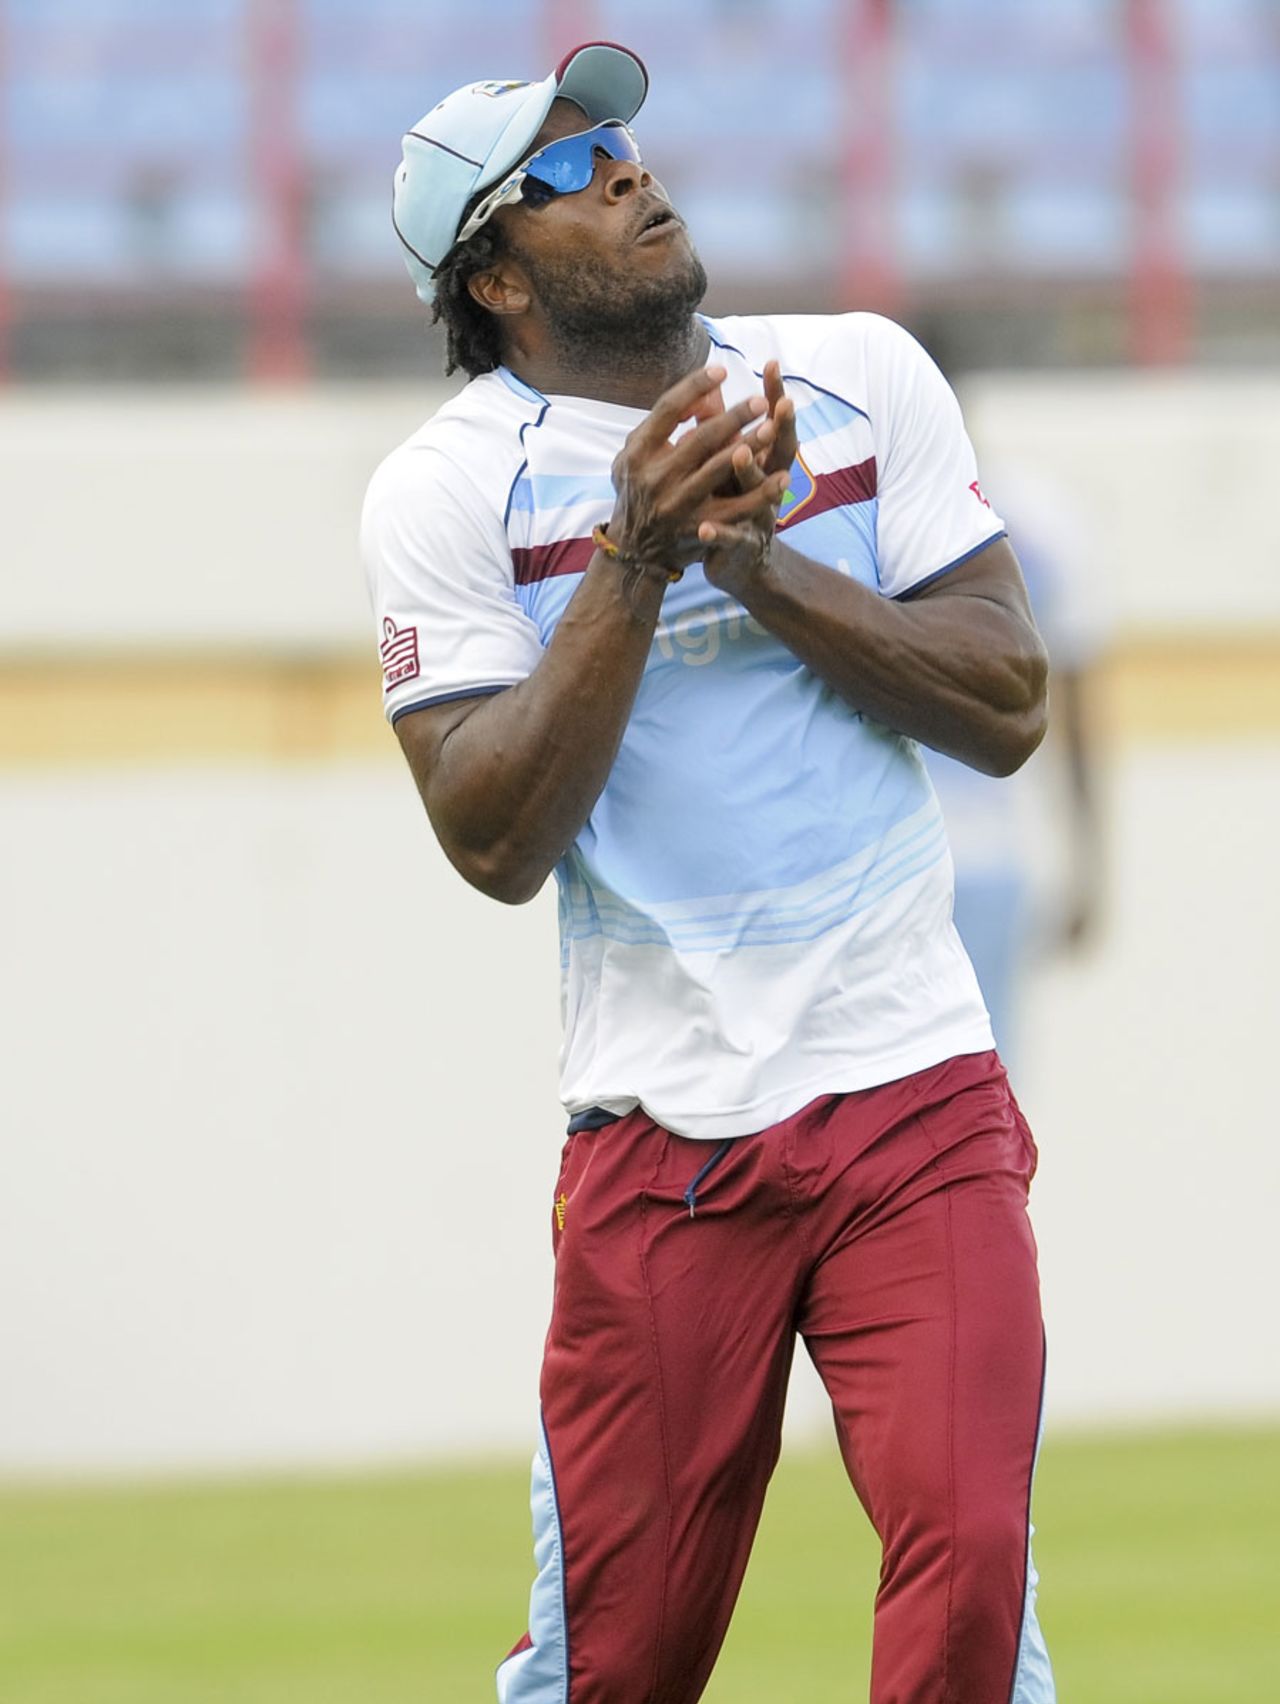 Kirk Edwards gets under a catch during a training session, Gros Islet, September 12, 2014